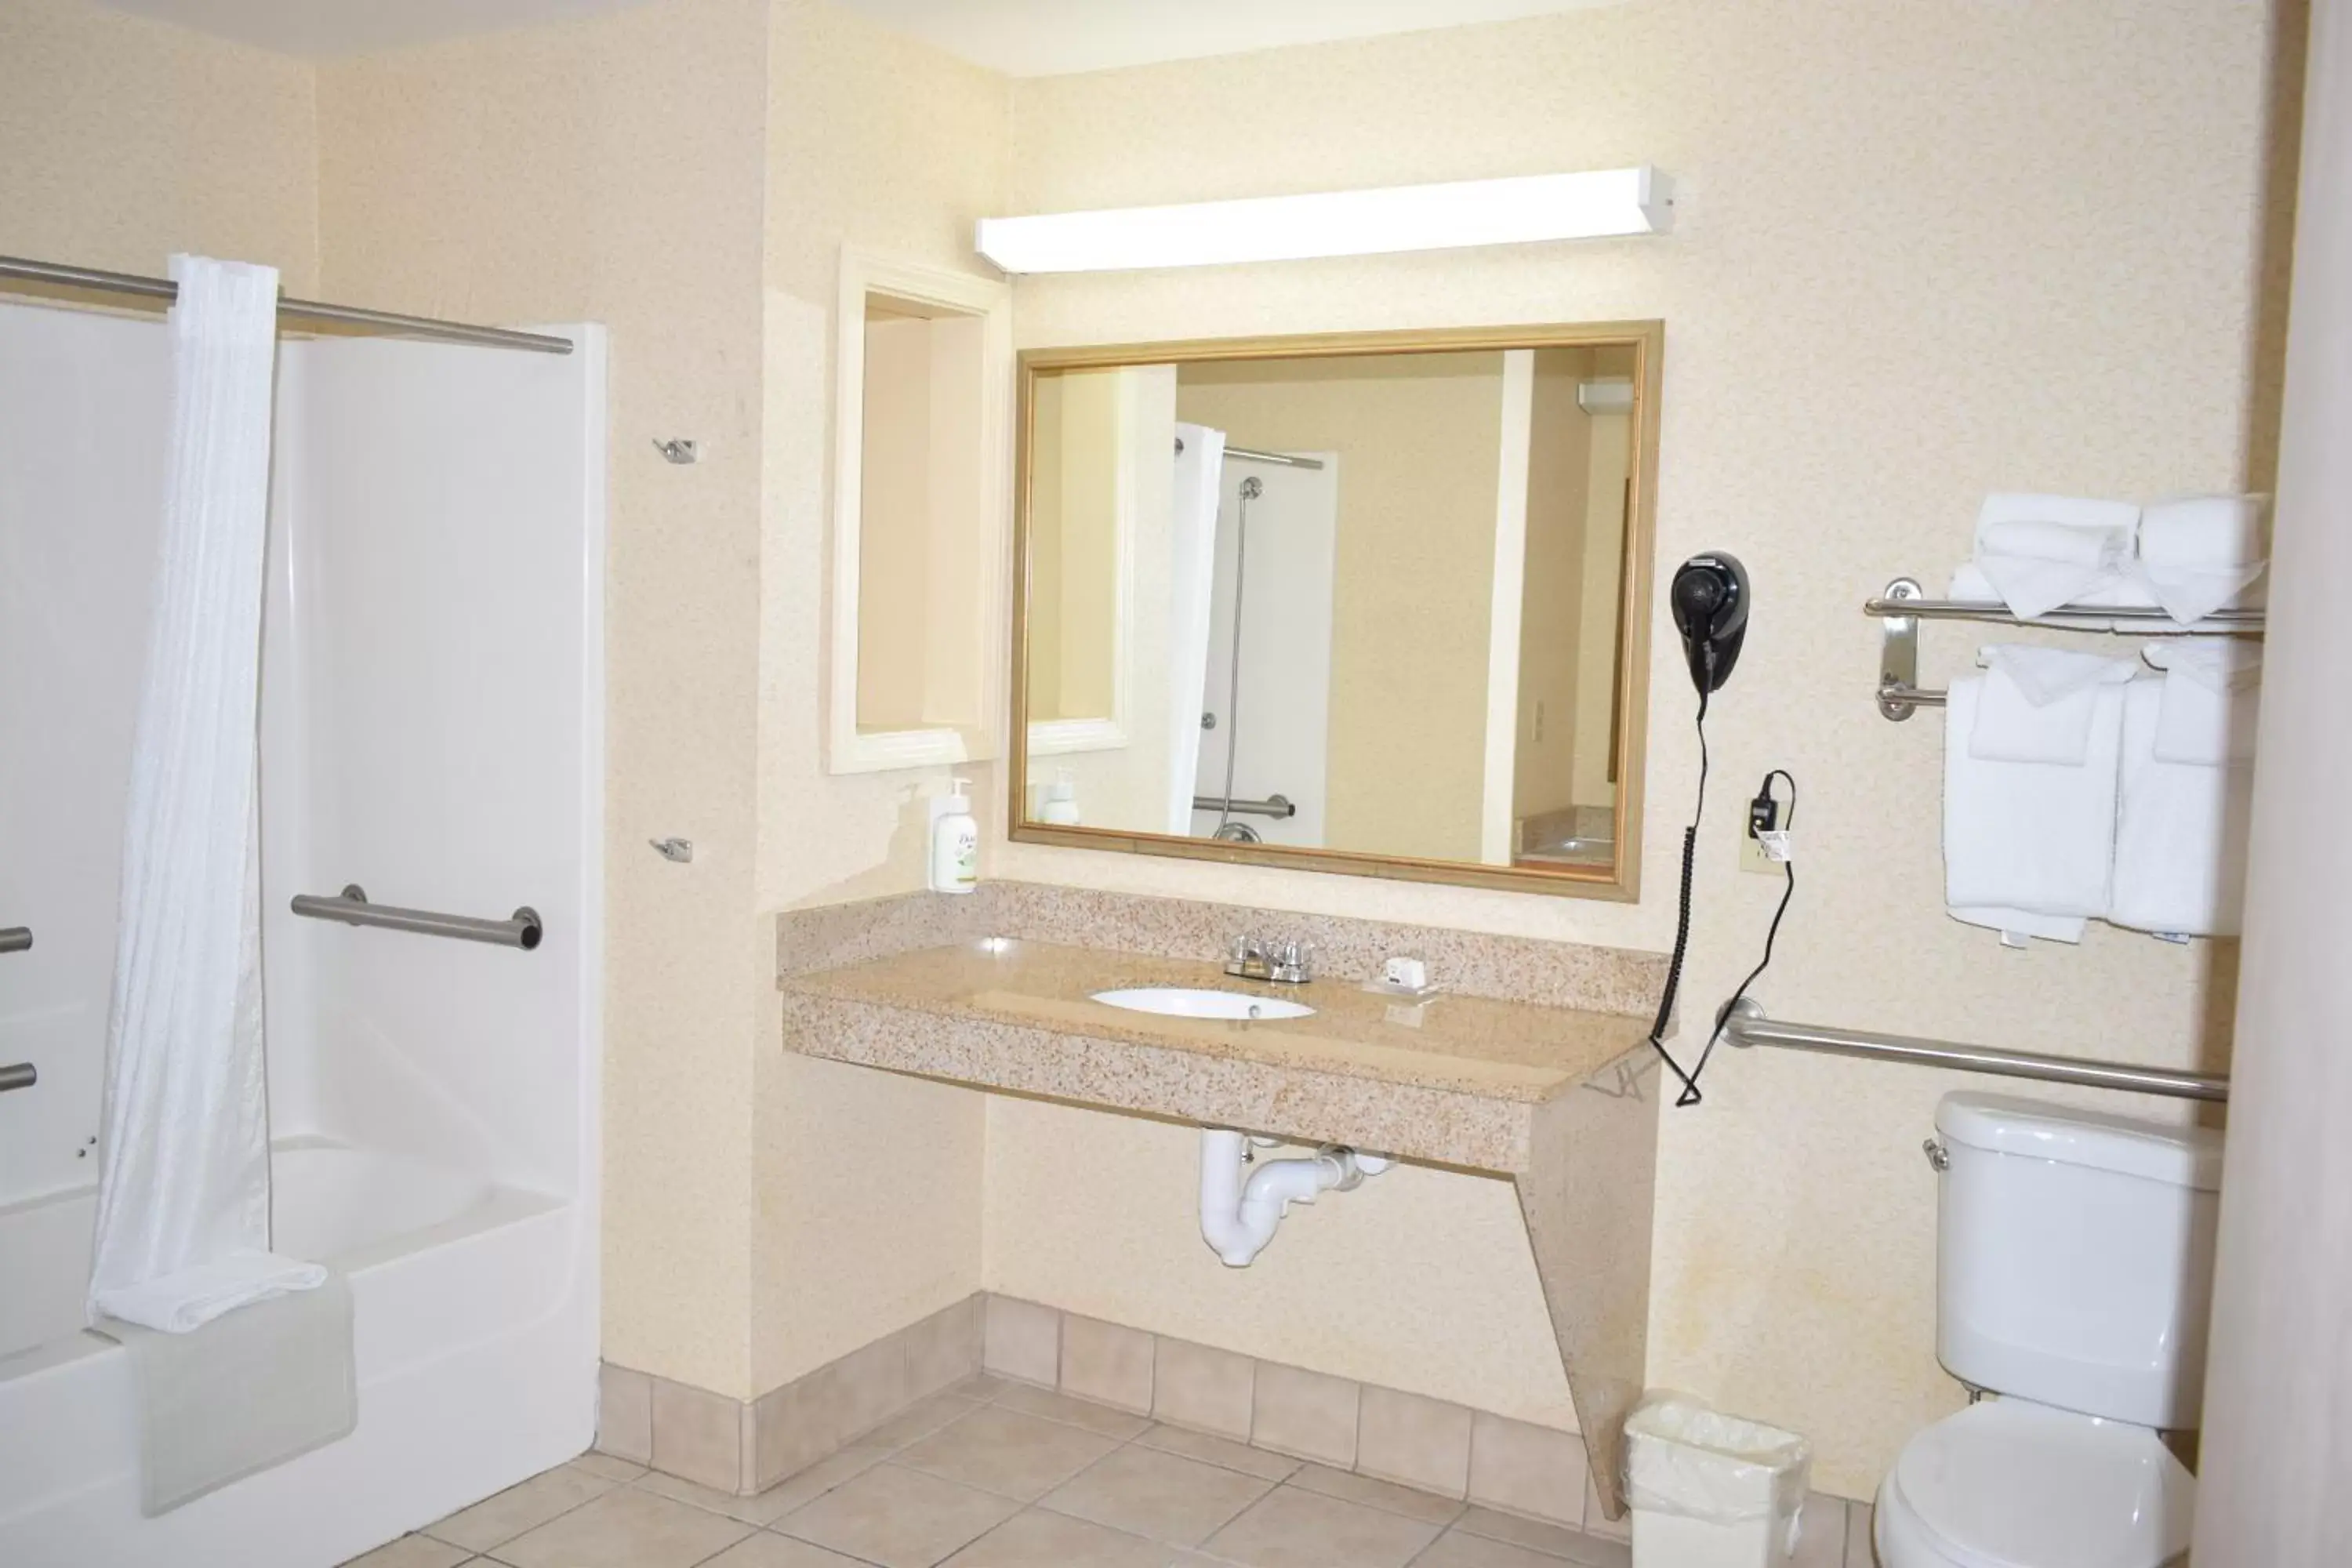 Bathroom in Wingate by Wyndham Youngstown - Austintown